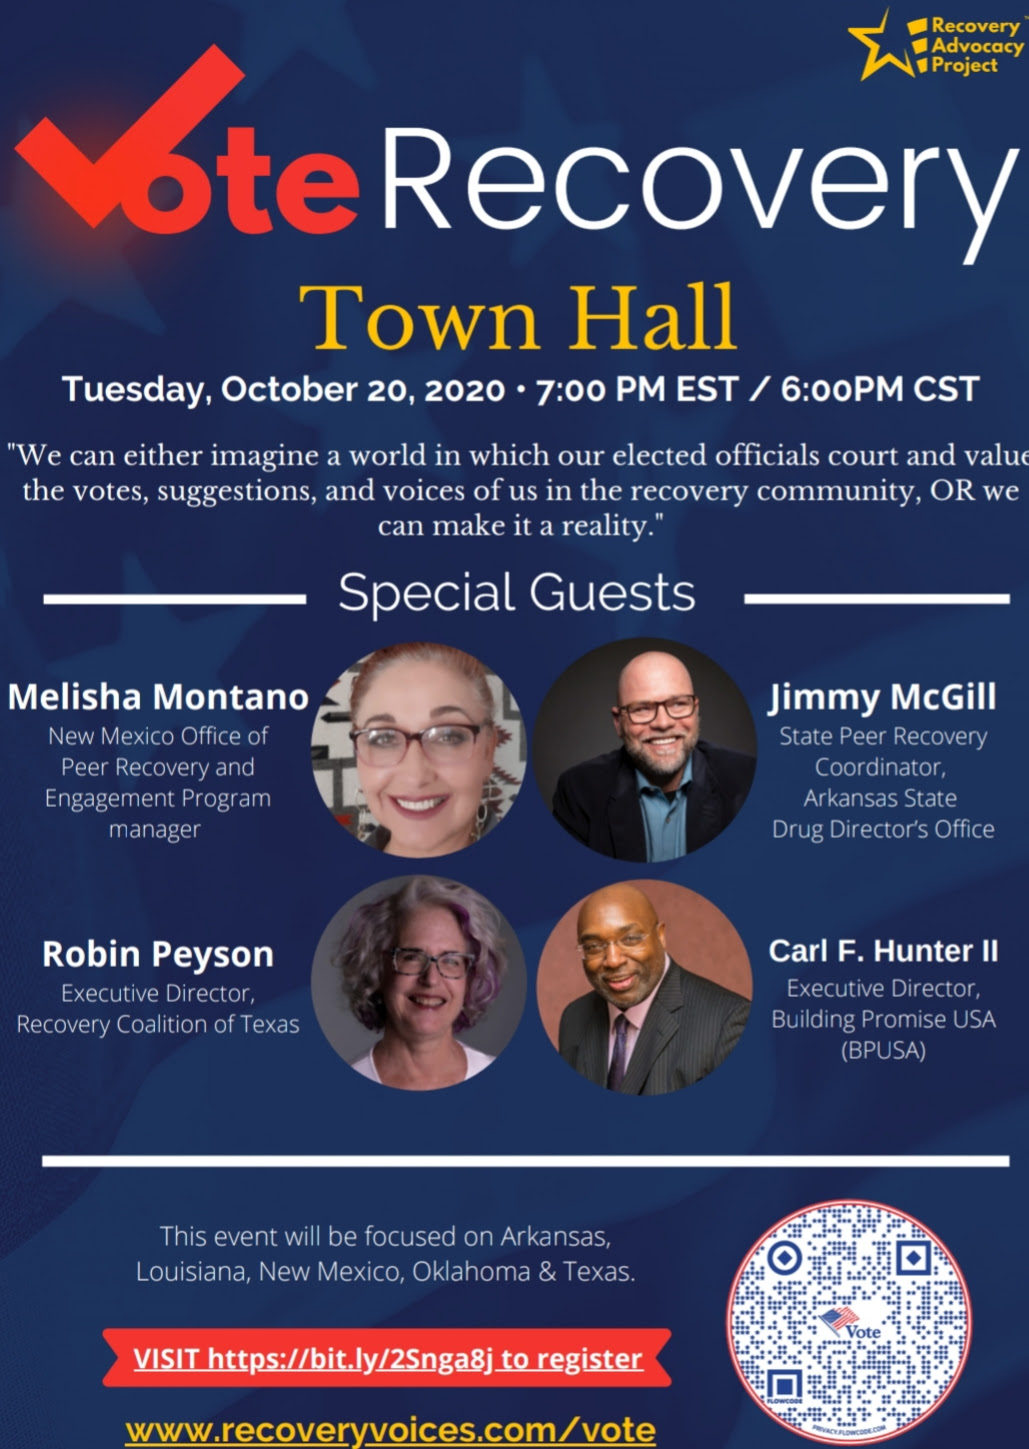 vote recovery town hall flyer